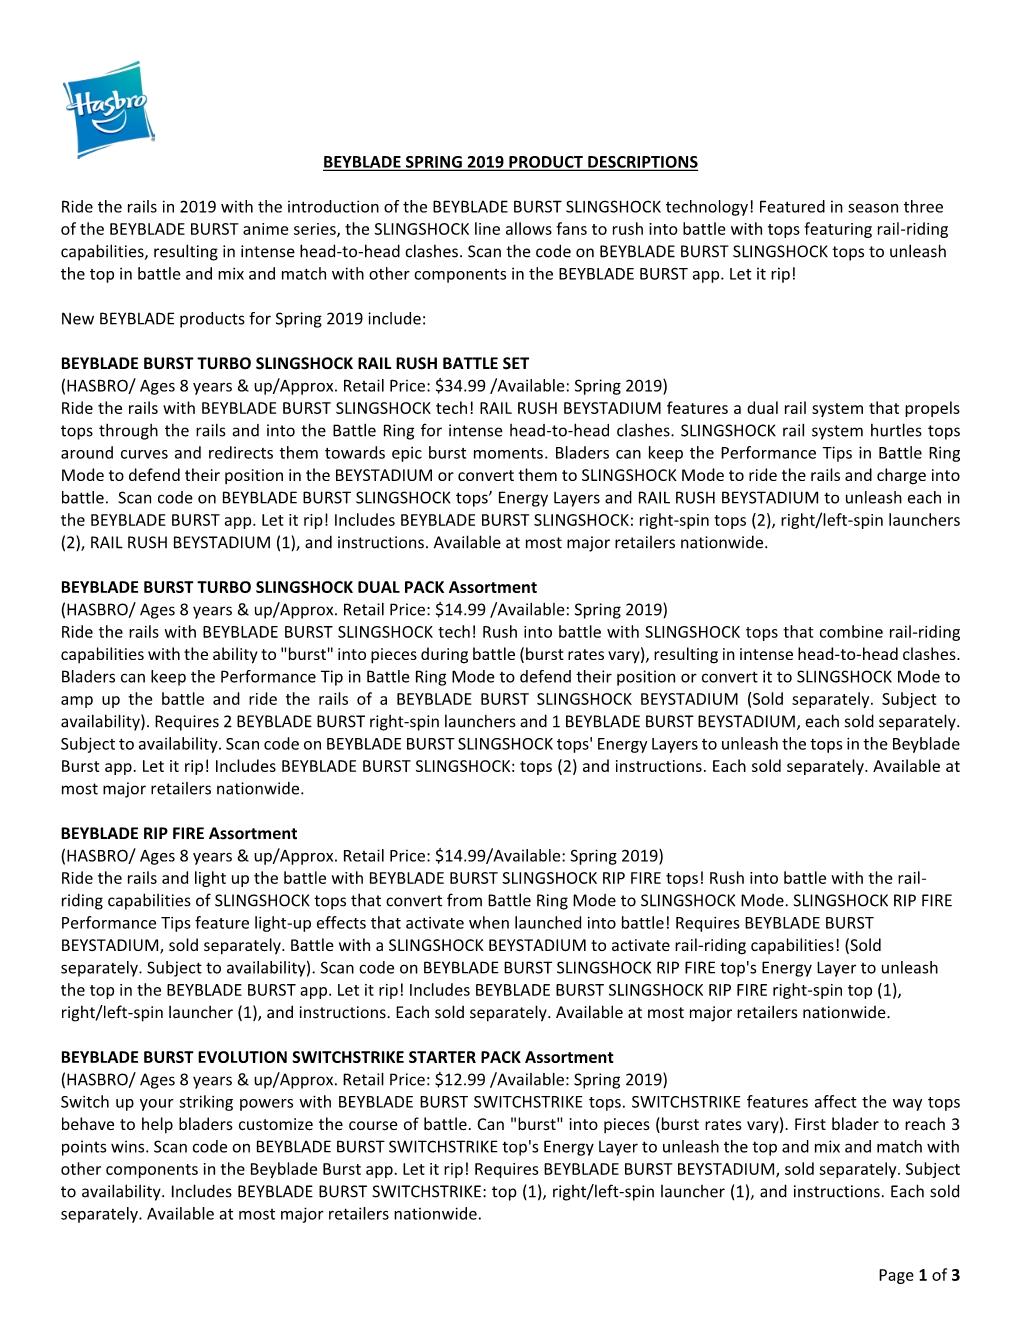 Page 1 of 3 BEYBLADE SPRING 2019 PRODUCT DESCRIPTIONS Ride